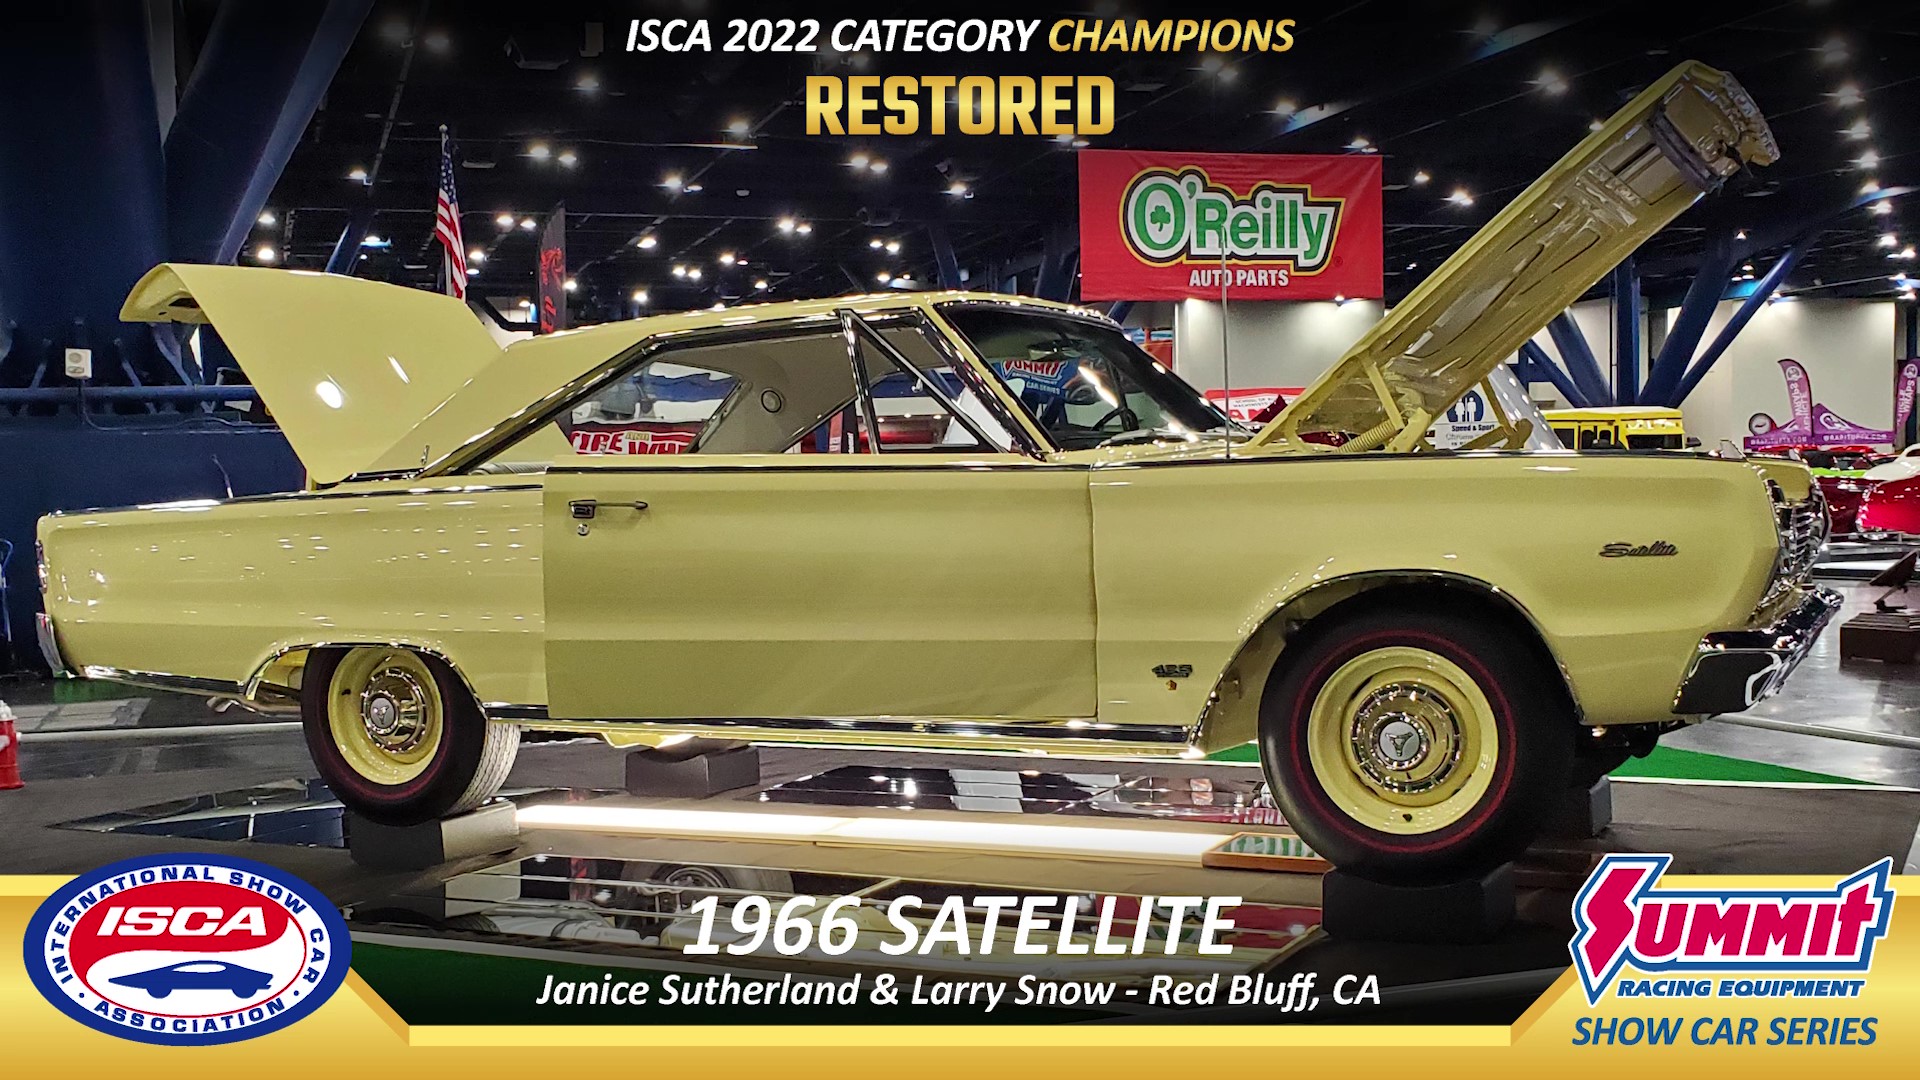 ISCA 2022 Category Champions - Restored